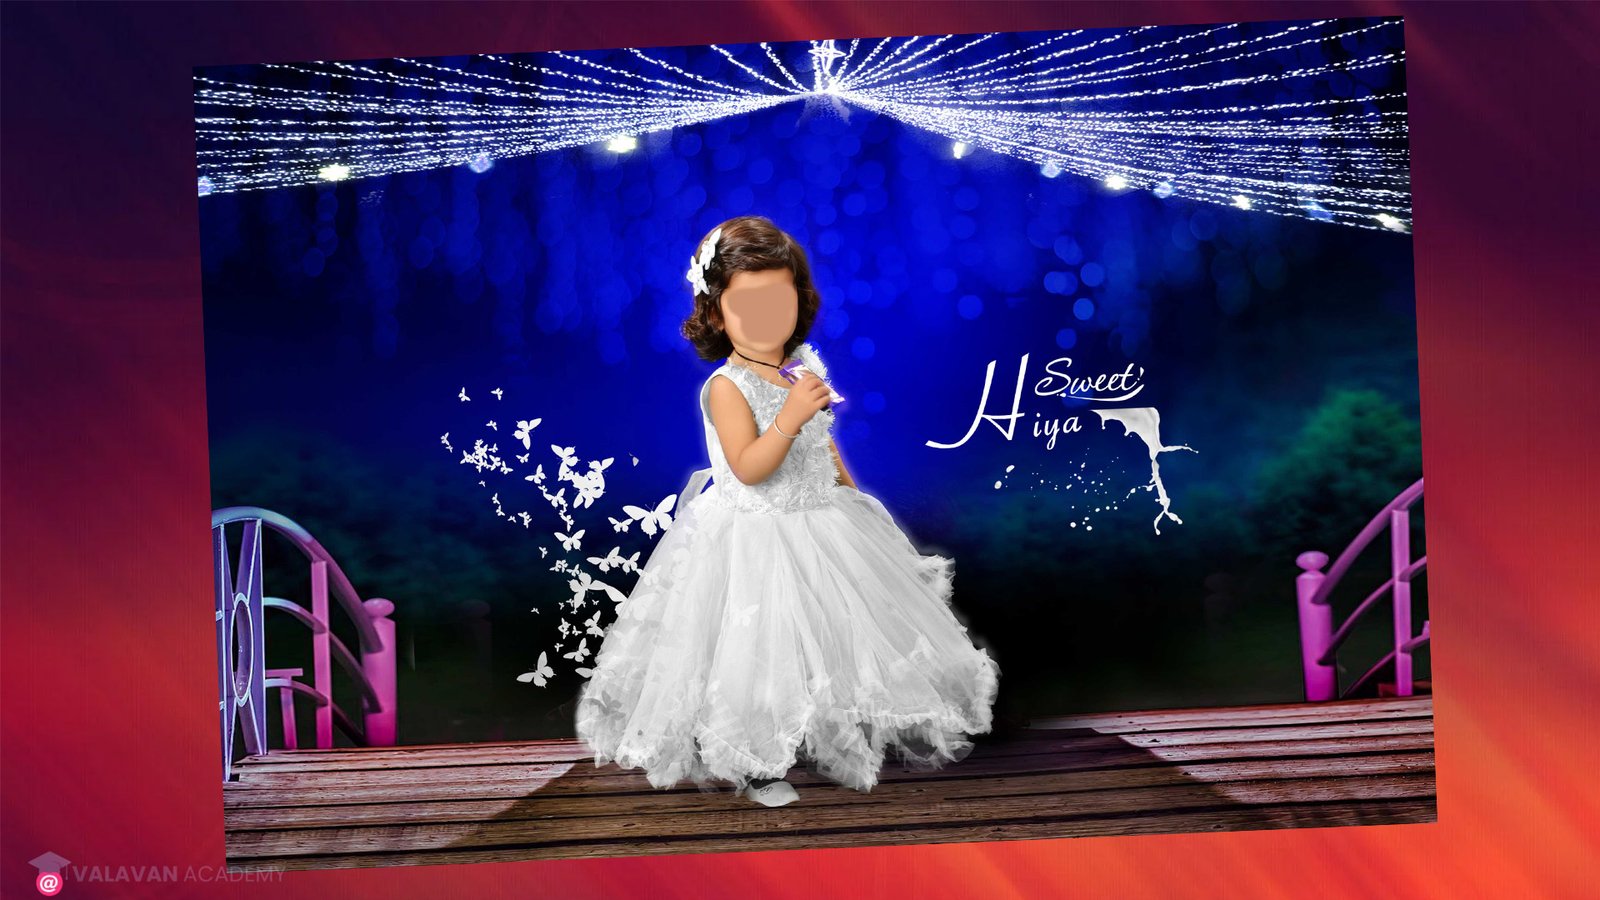 Little Girl Animation Frame PSD Free Download